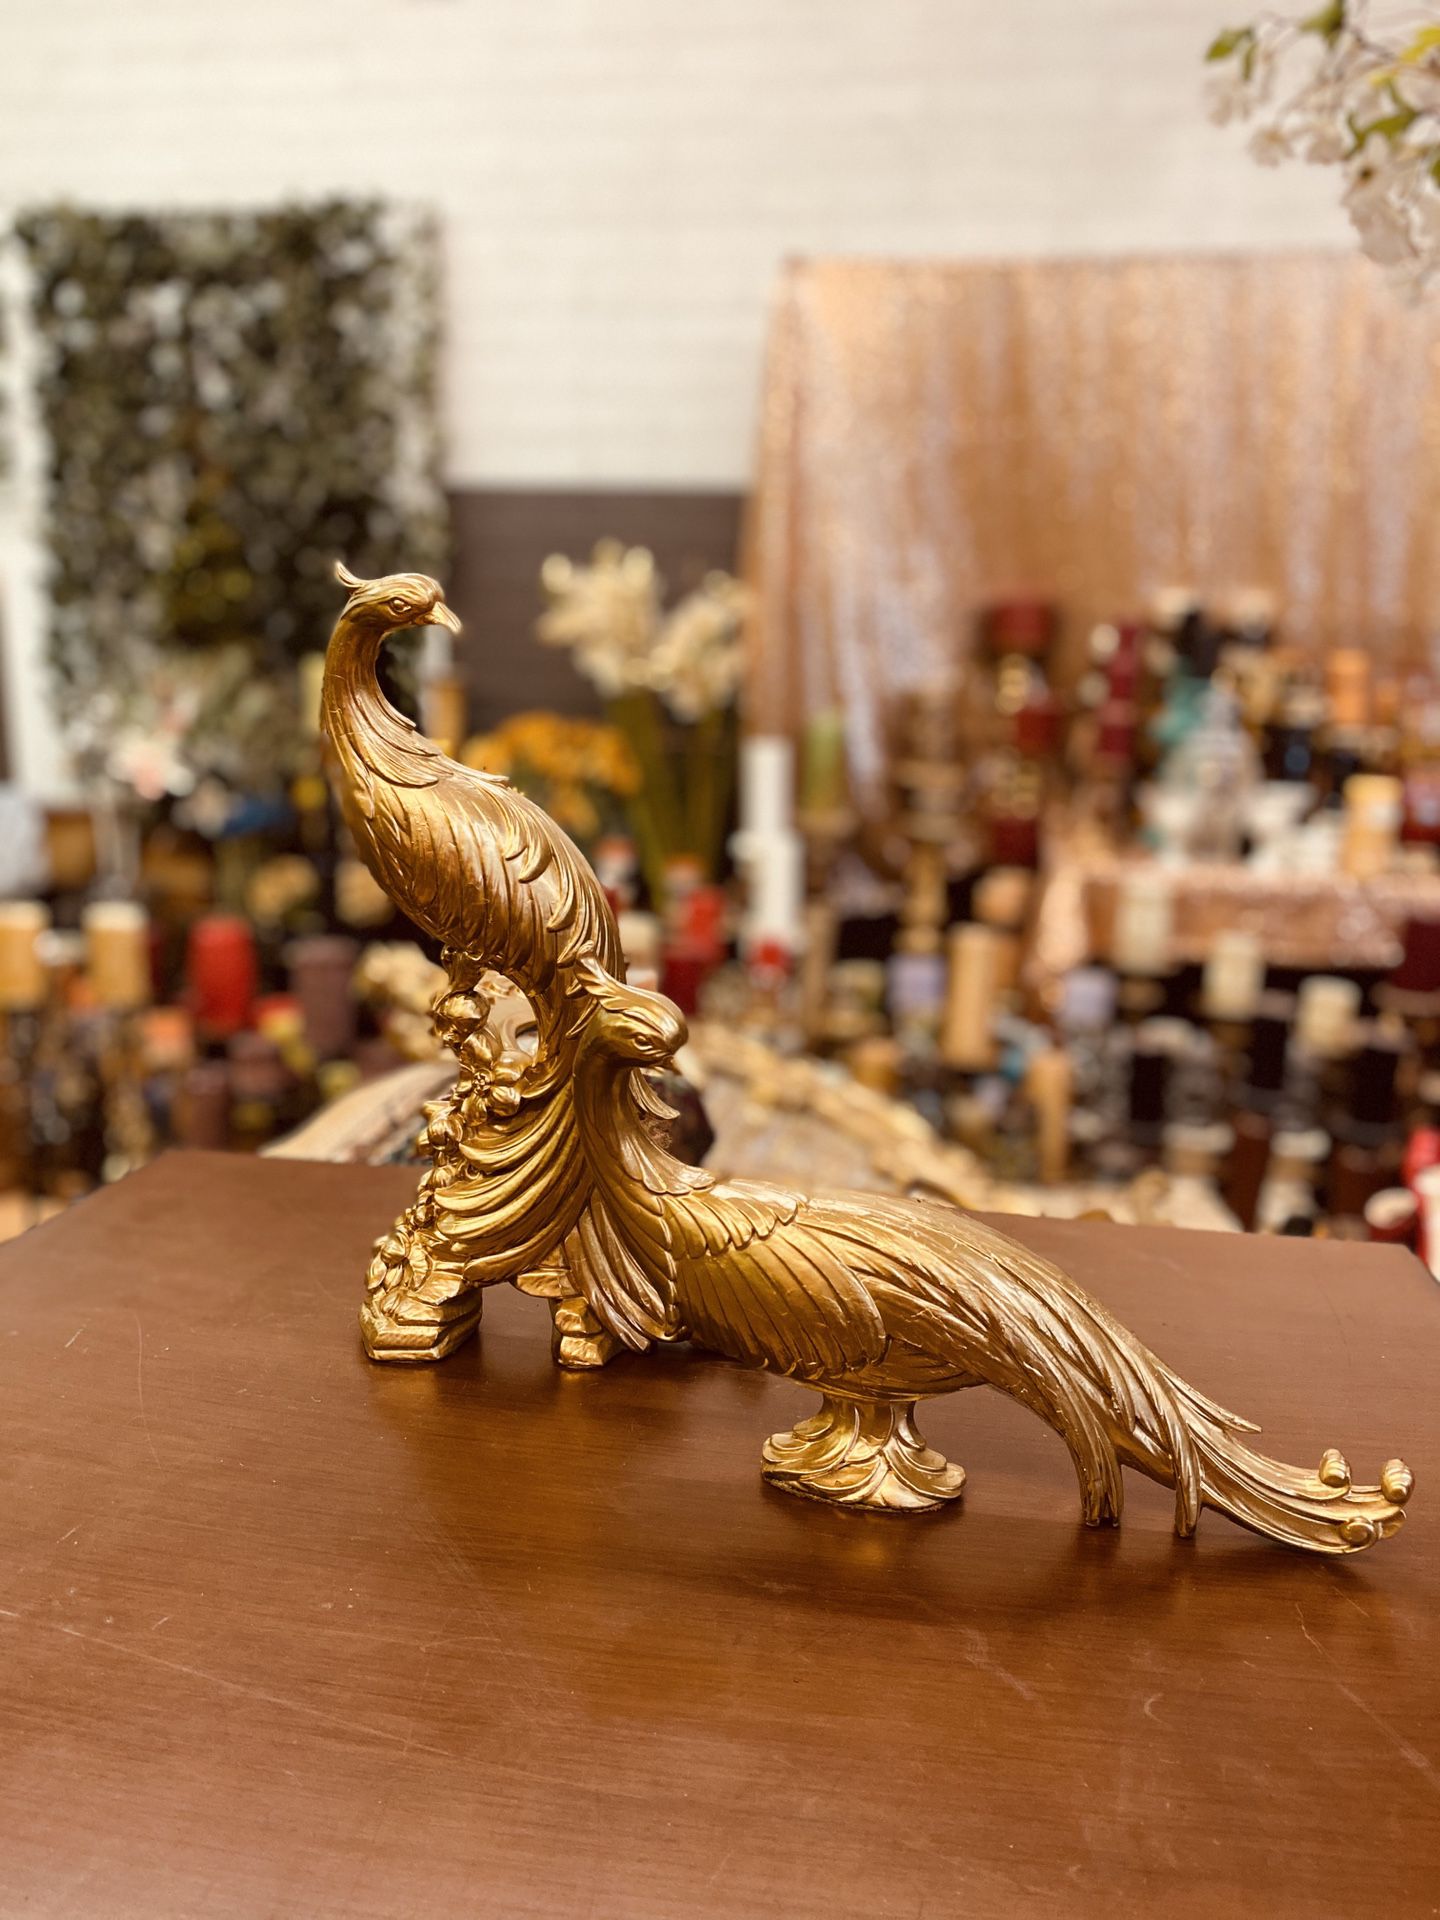 Vintage gold Peacock decor $40 firm “NO HOLDING “